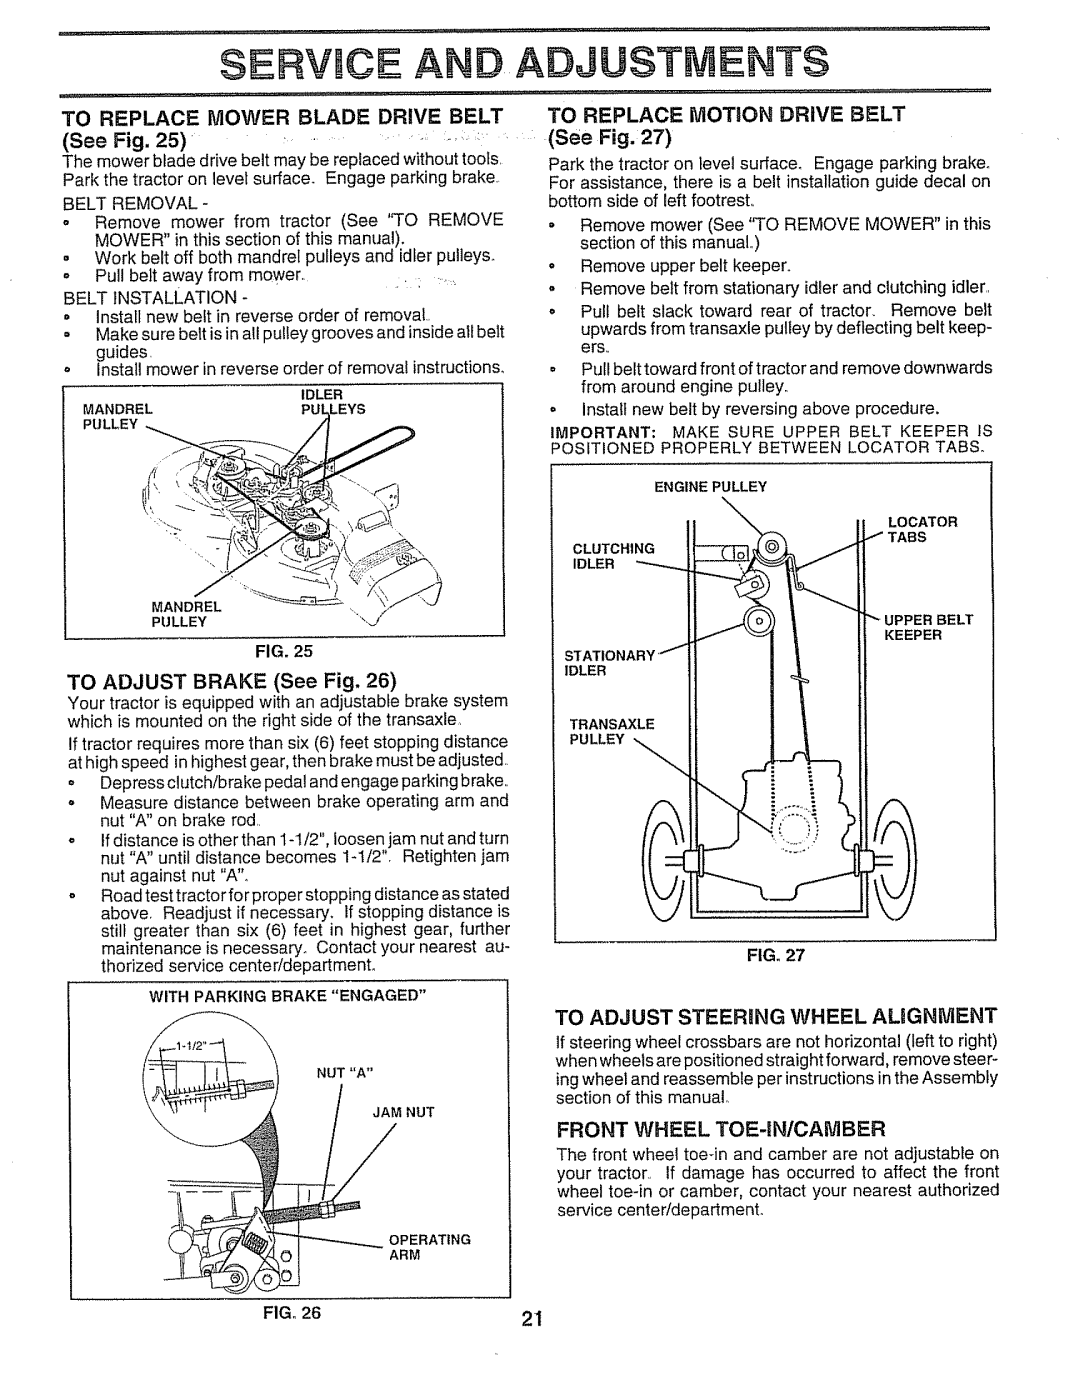 Sears 917.257552 manual Service And, Adjustments, To Replace Mower Blade Drive Belt, TO ADJUST BRAKE See Fig 